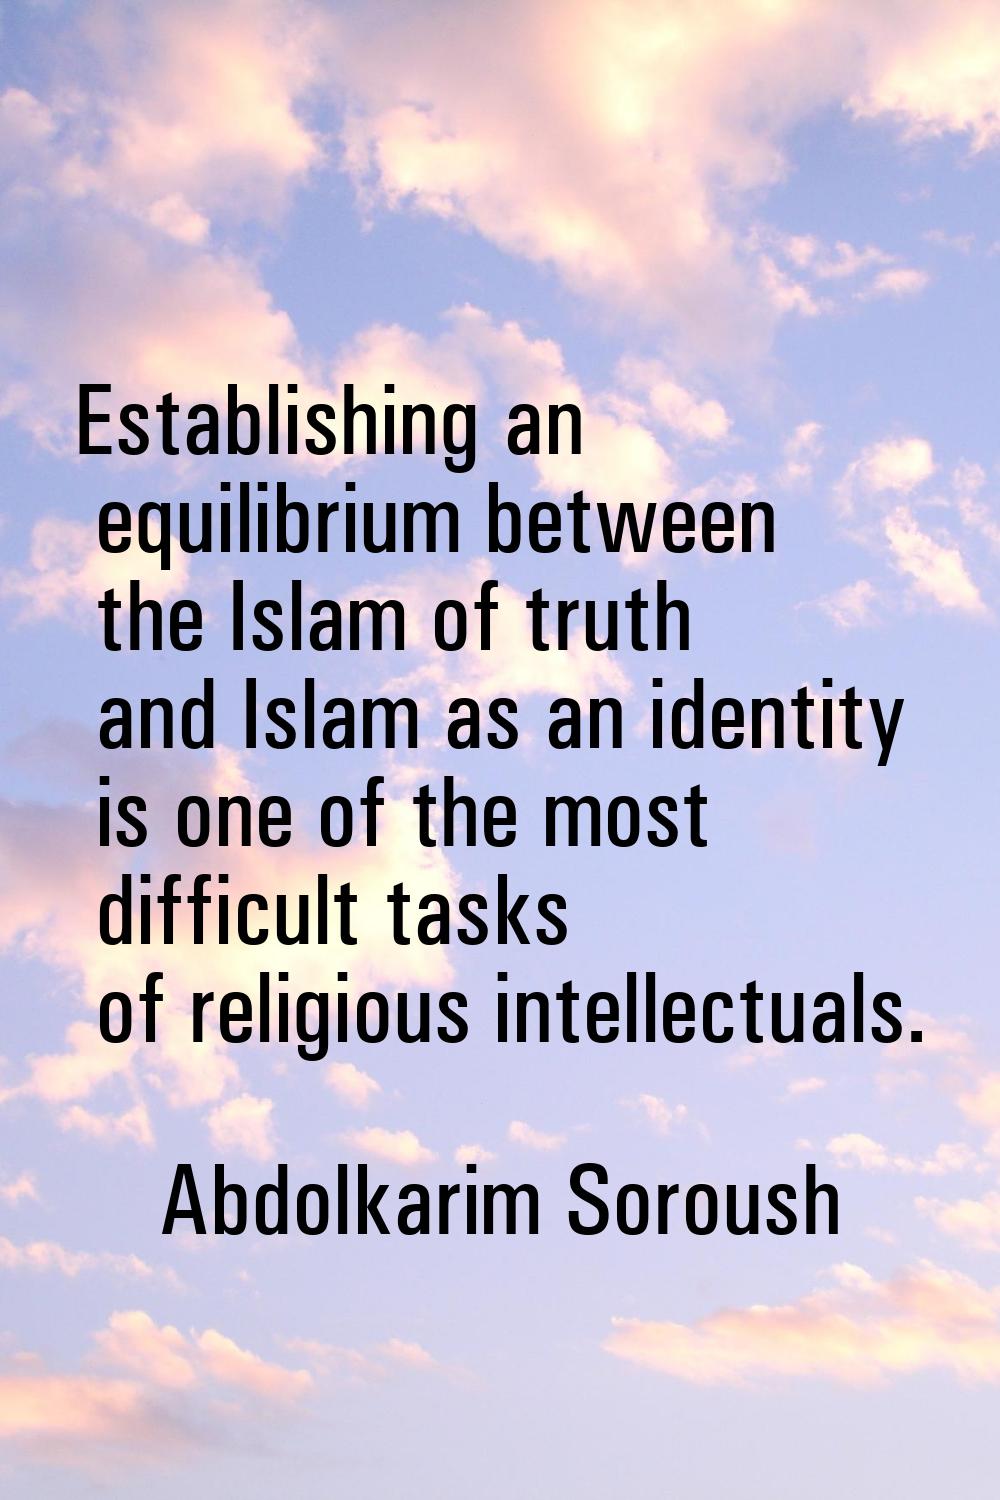 Establishing an equilibrium between the Islam of truth and Islam as an identity is one of the most 